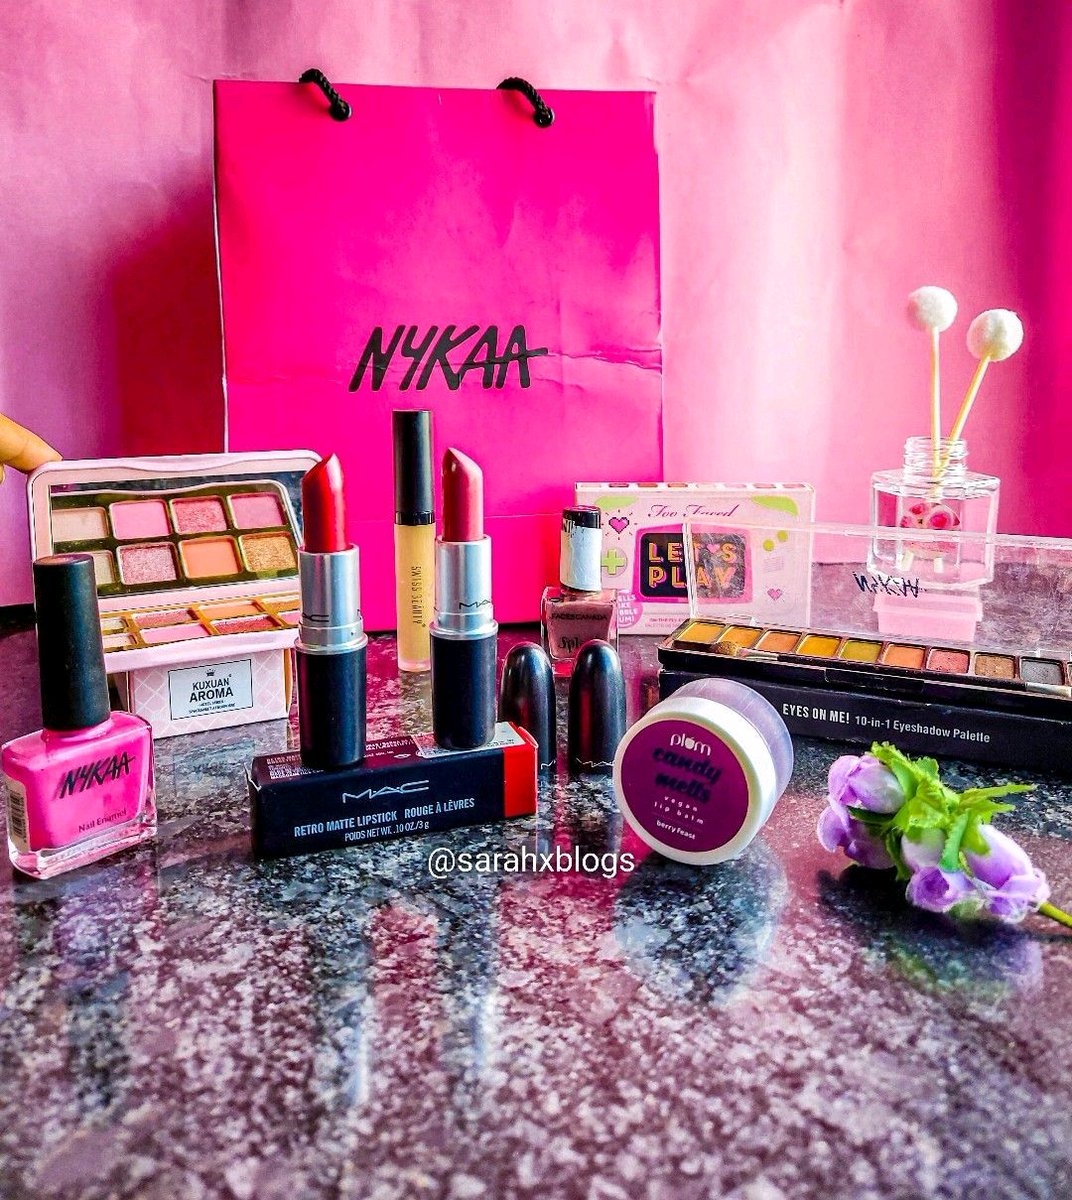 Flatlay Photography for @MyNykaa 
DM for professional captures📸
#indianproductphotography #productphotographyindia #productstylist #shotonandroid #productphotography #creativeproductphotography #productphotographyathome #ugccreator #ugccommunity #photographytipsandtricks